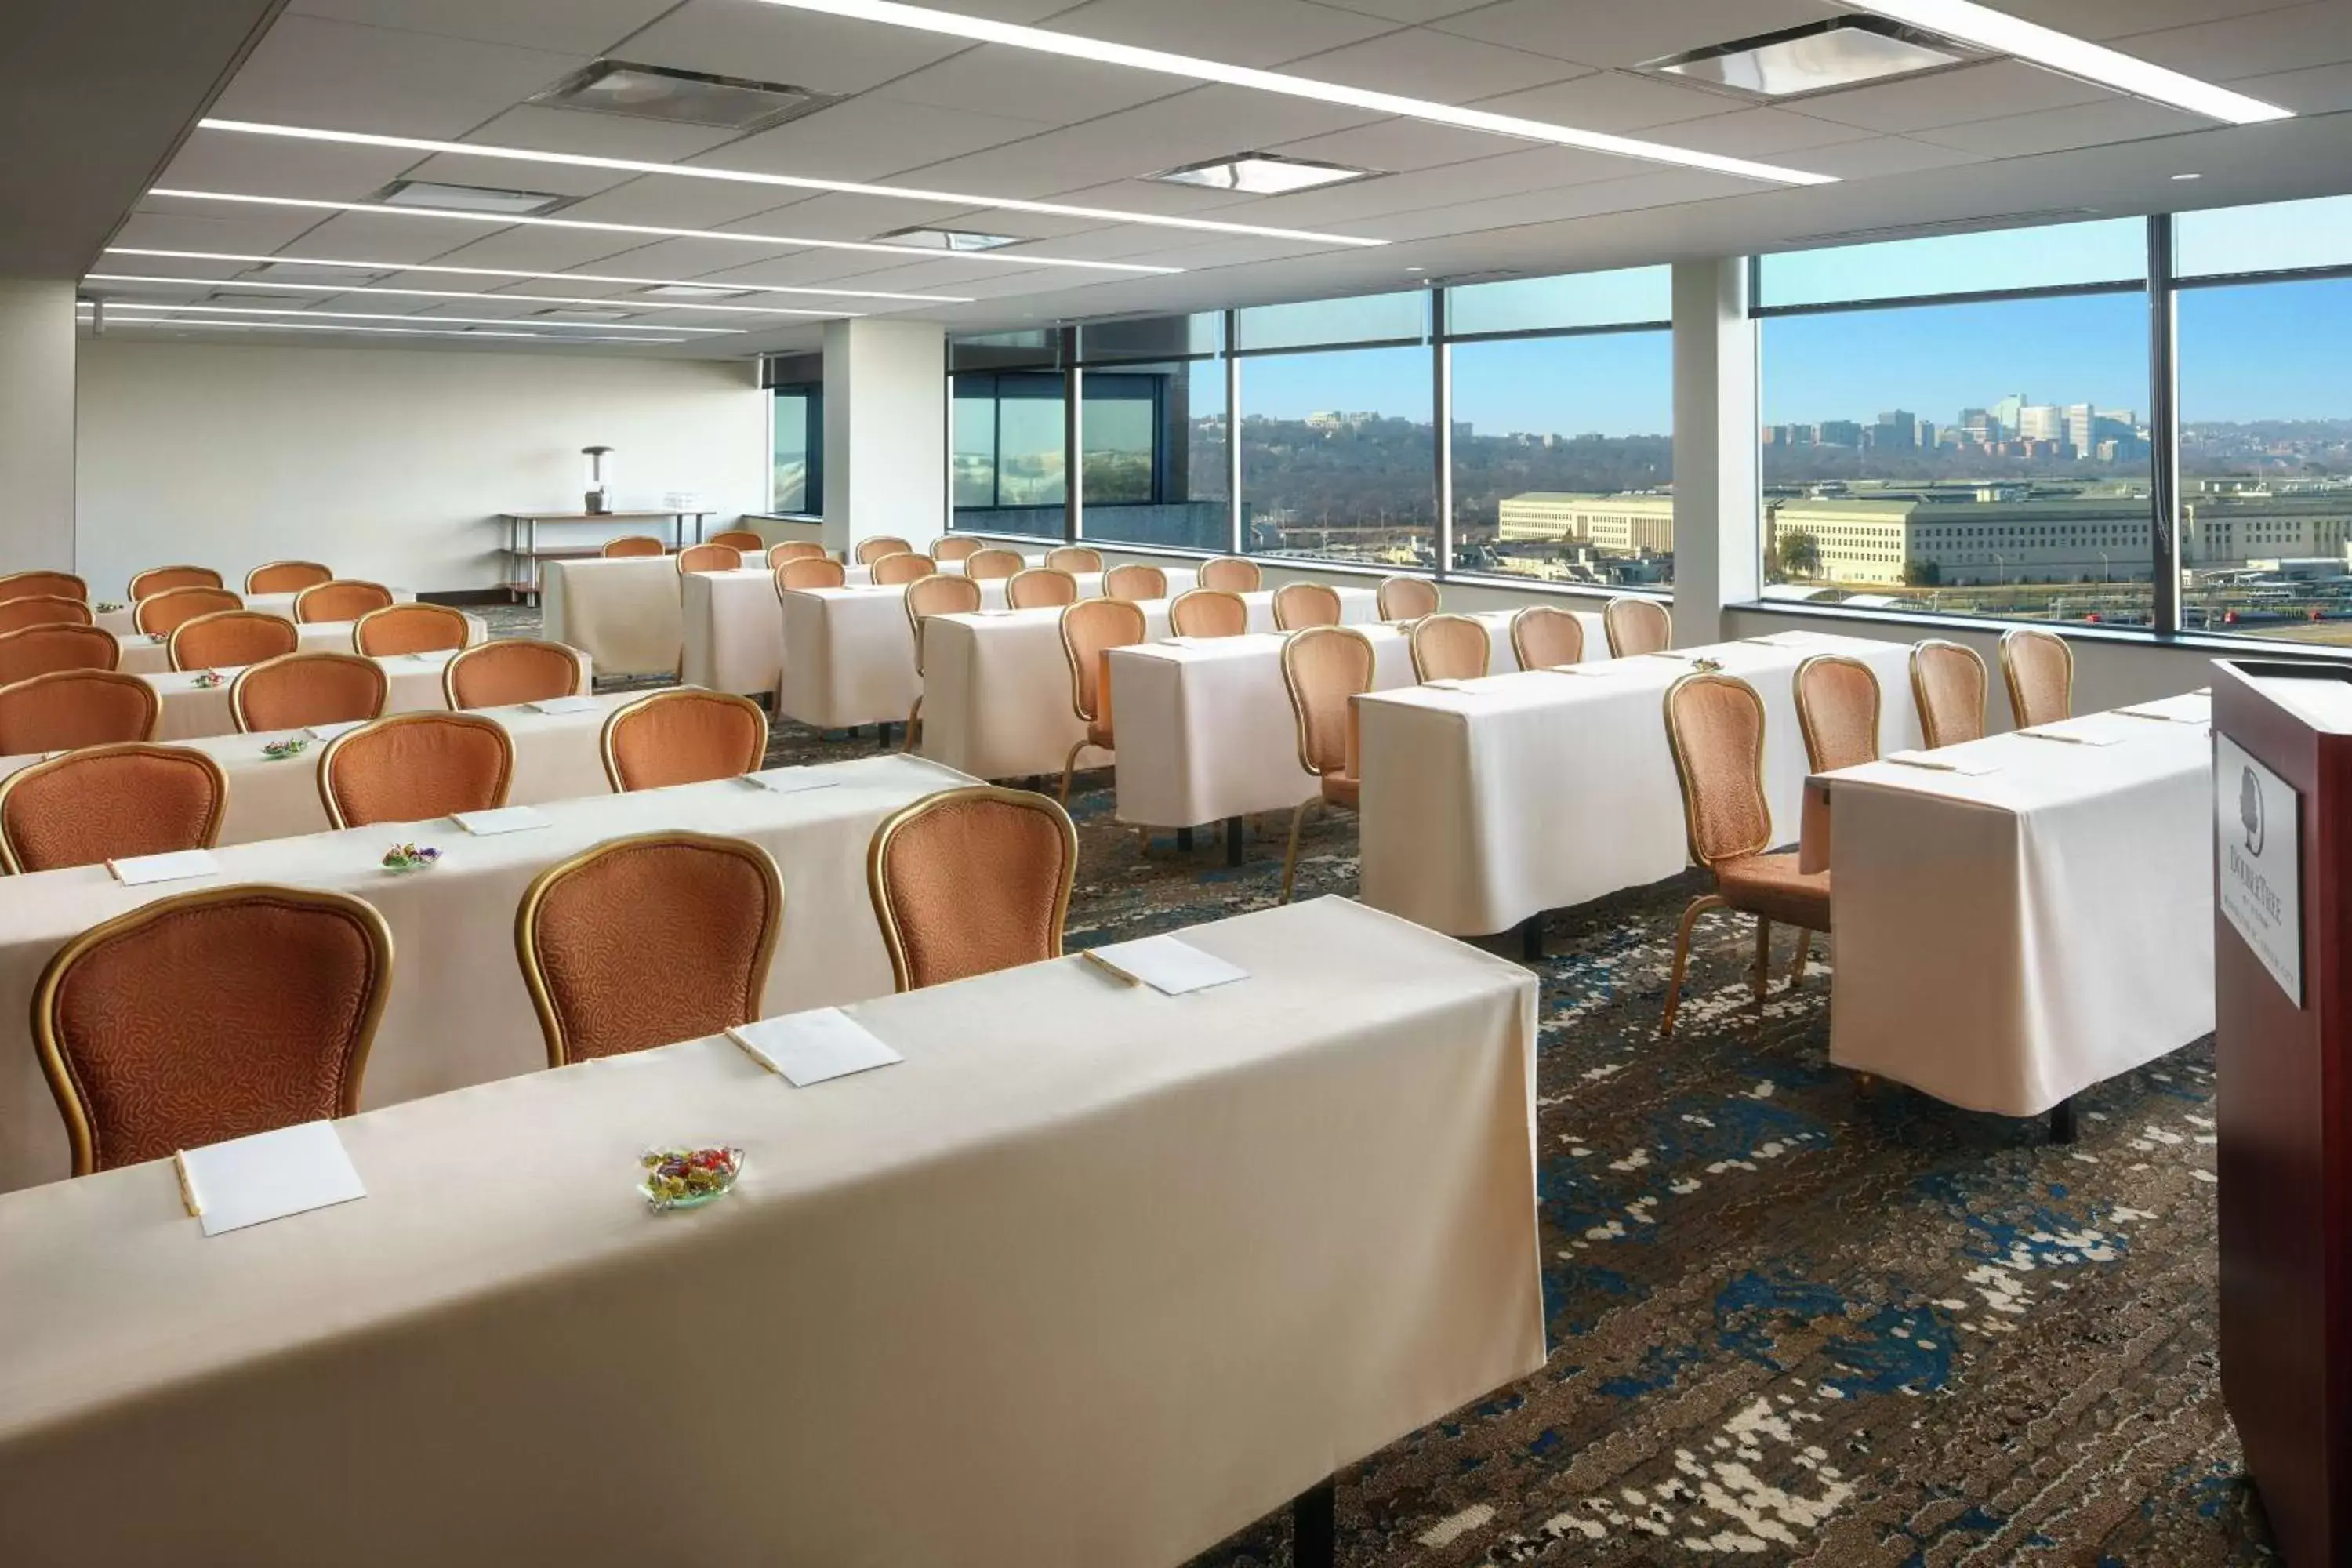 Meeting/conference room in DoubleTree by Hilton Washington DC – Crystal City